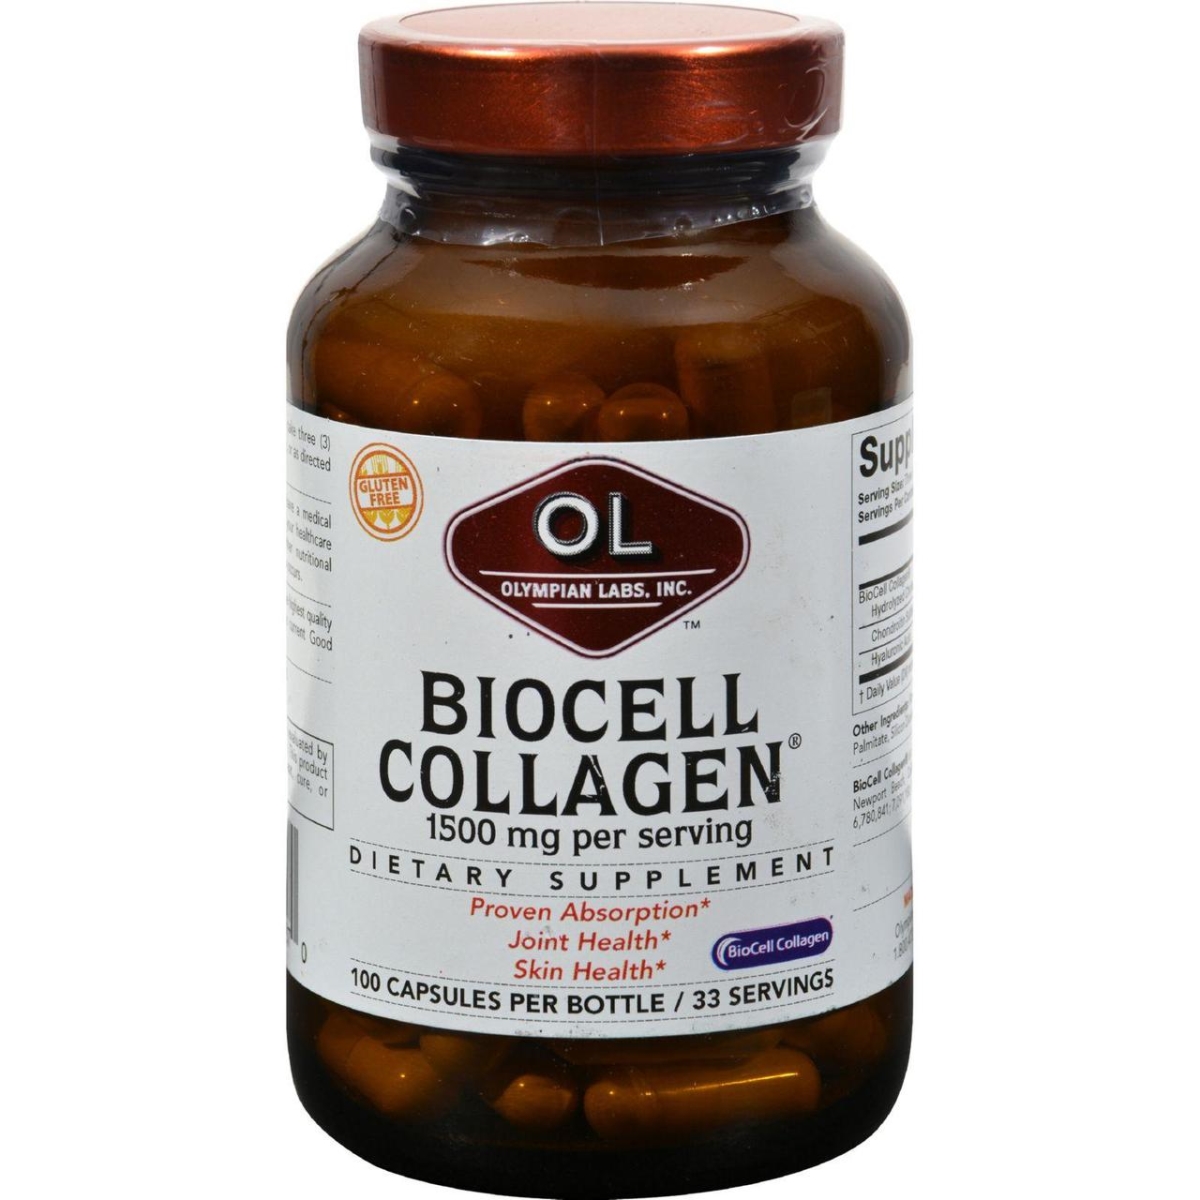 Hg0381467 Biocell Collagen - 100 Capsules